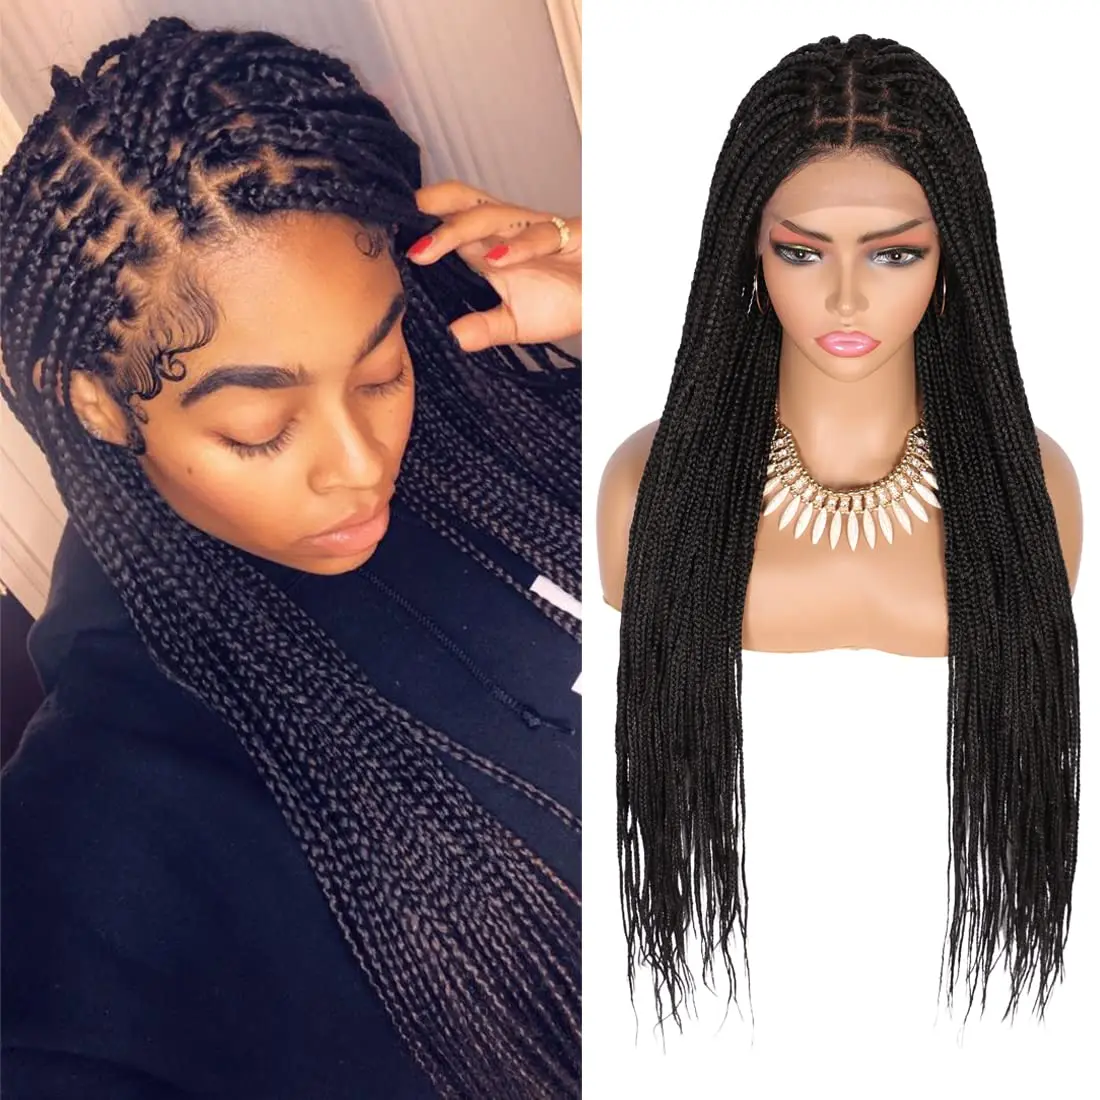 Lace Front Box Braided Wigs for Black Women Long Synthetic Wig Black Lightweight Twist Box Braid Wig Bug# 30# 30inch